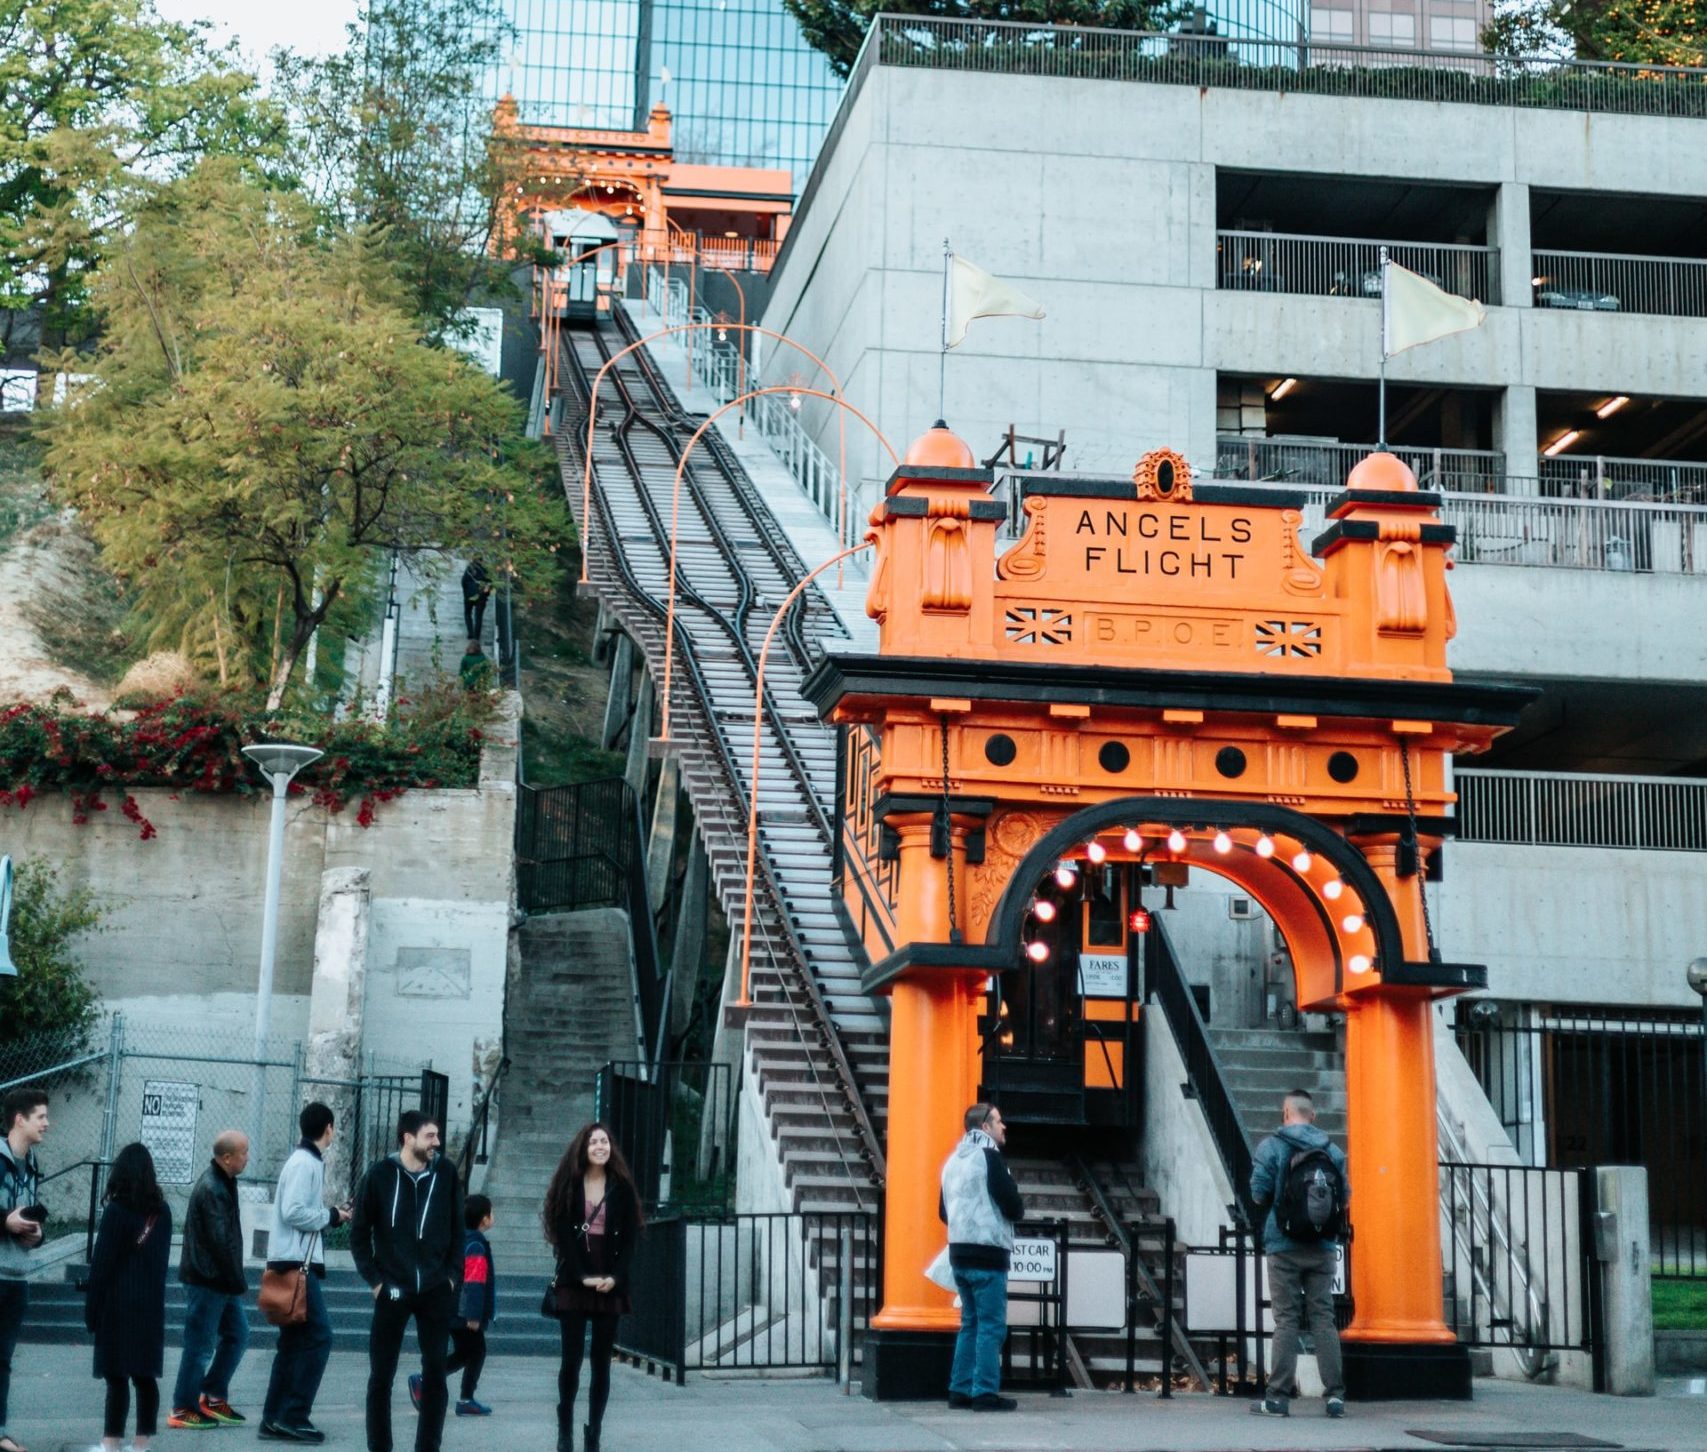 Waiting in line for a railway ride on Angels Flight in Los Angeles